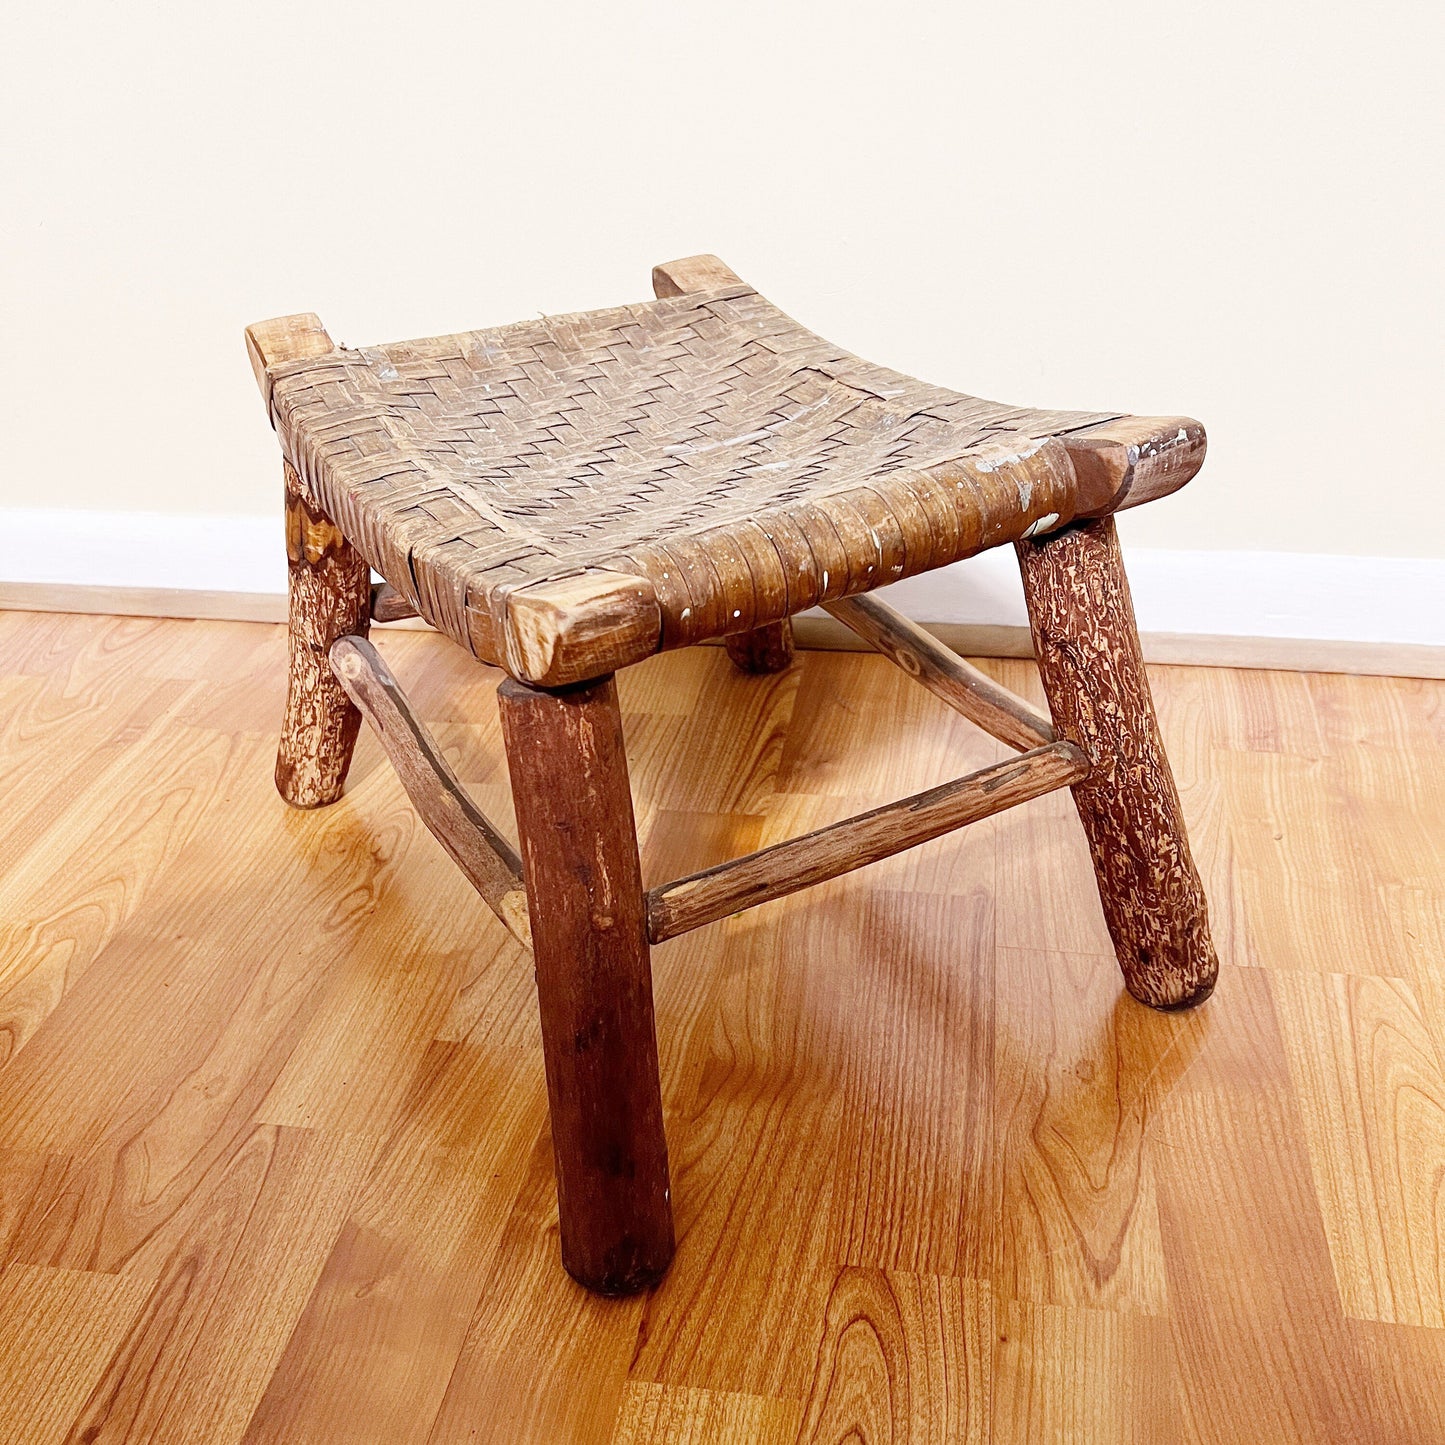 Vintage Columbus Hickory Chair Co. Foot Stool | Vintage Hickory Style Footstool with Woven Seat | Columbus Indiana Furniture